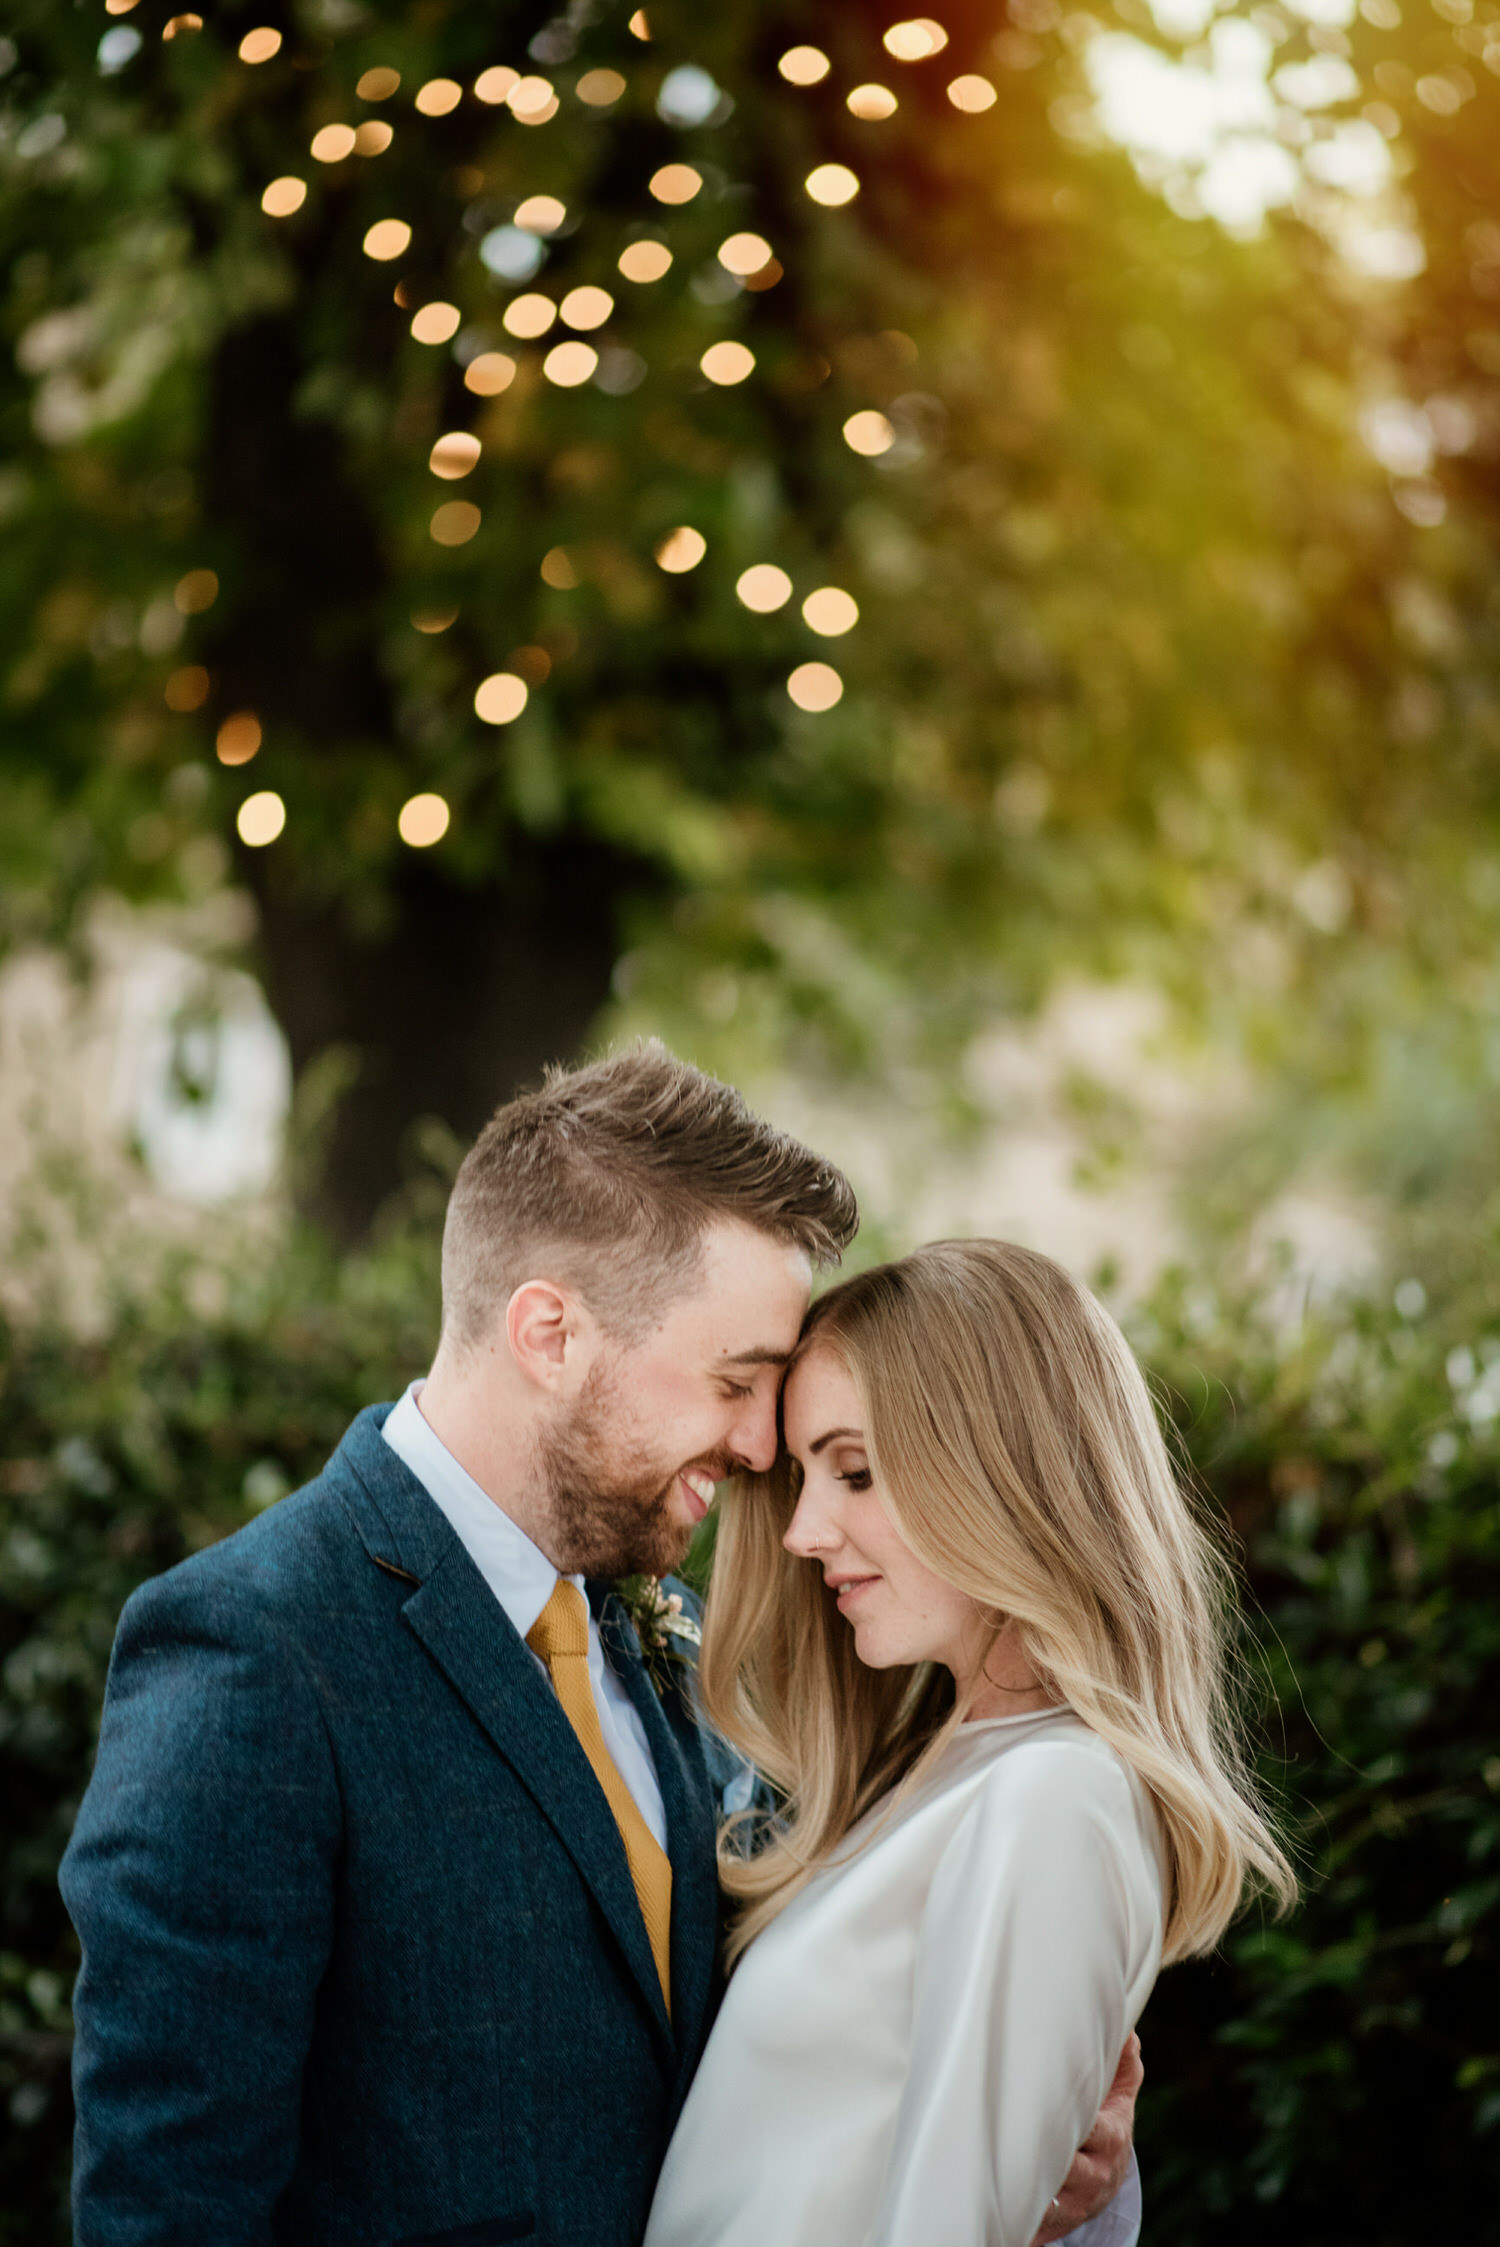 Romantic photo of a couple holding each other close on their wedding day. He's smiling; she looks blissful and content. There are fairy lights and trees in the background. By London wedding photographer Ellie Gillard